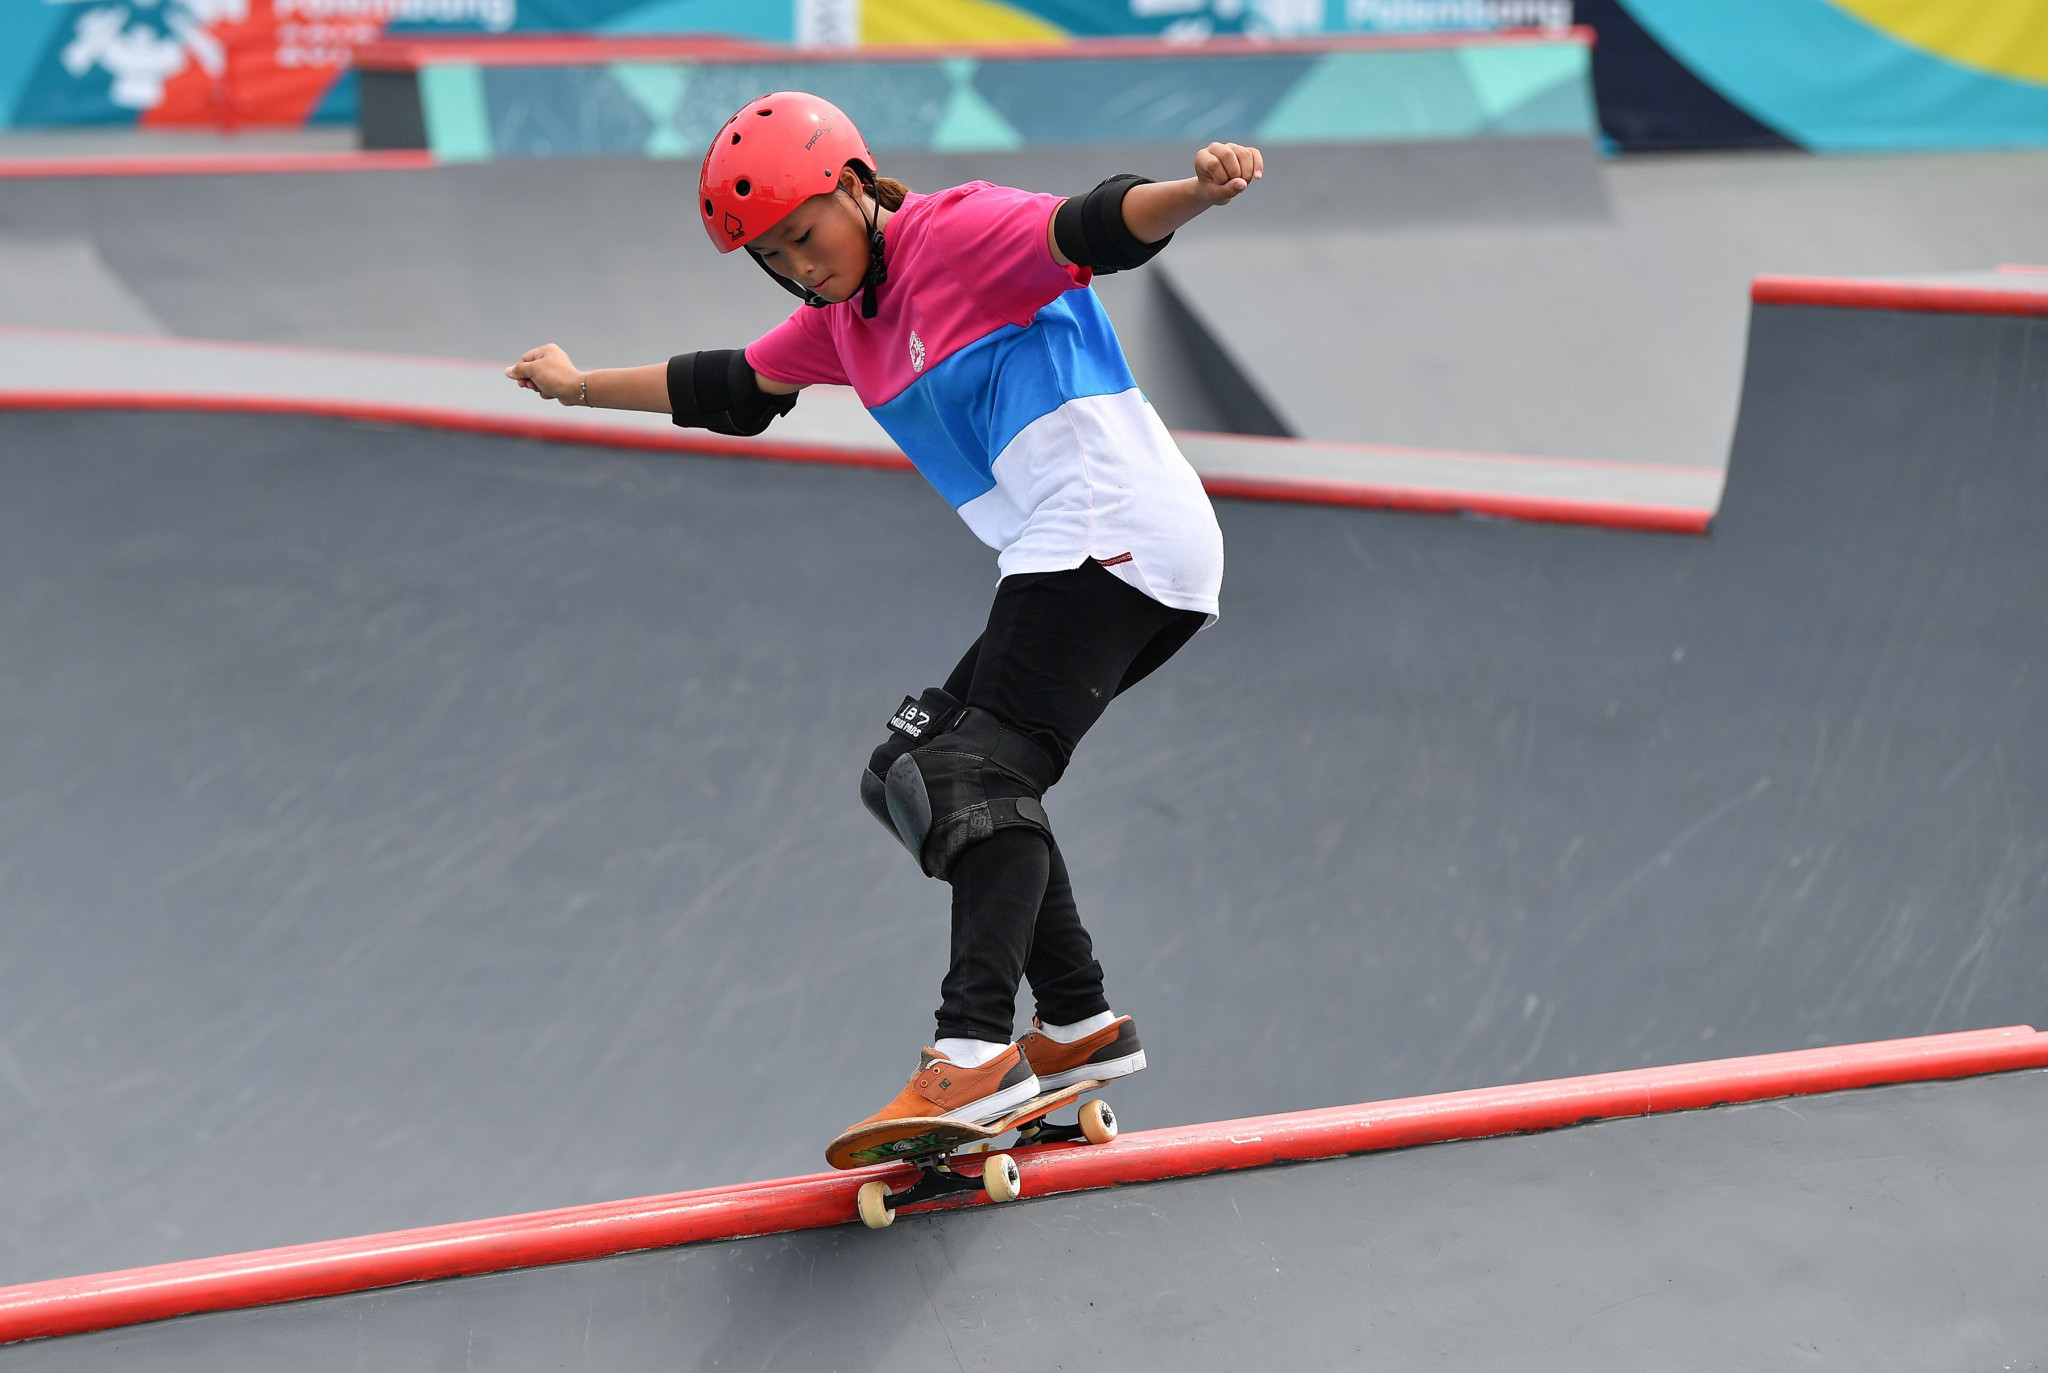 Sixteen-year-old Sakura Yosozumi was among the winners on the sole day of skateboarding medal action at the 2018 Asian Games in Jakarta and Palembang ©Getty Images